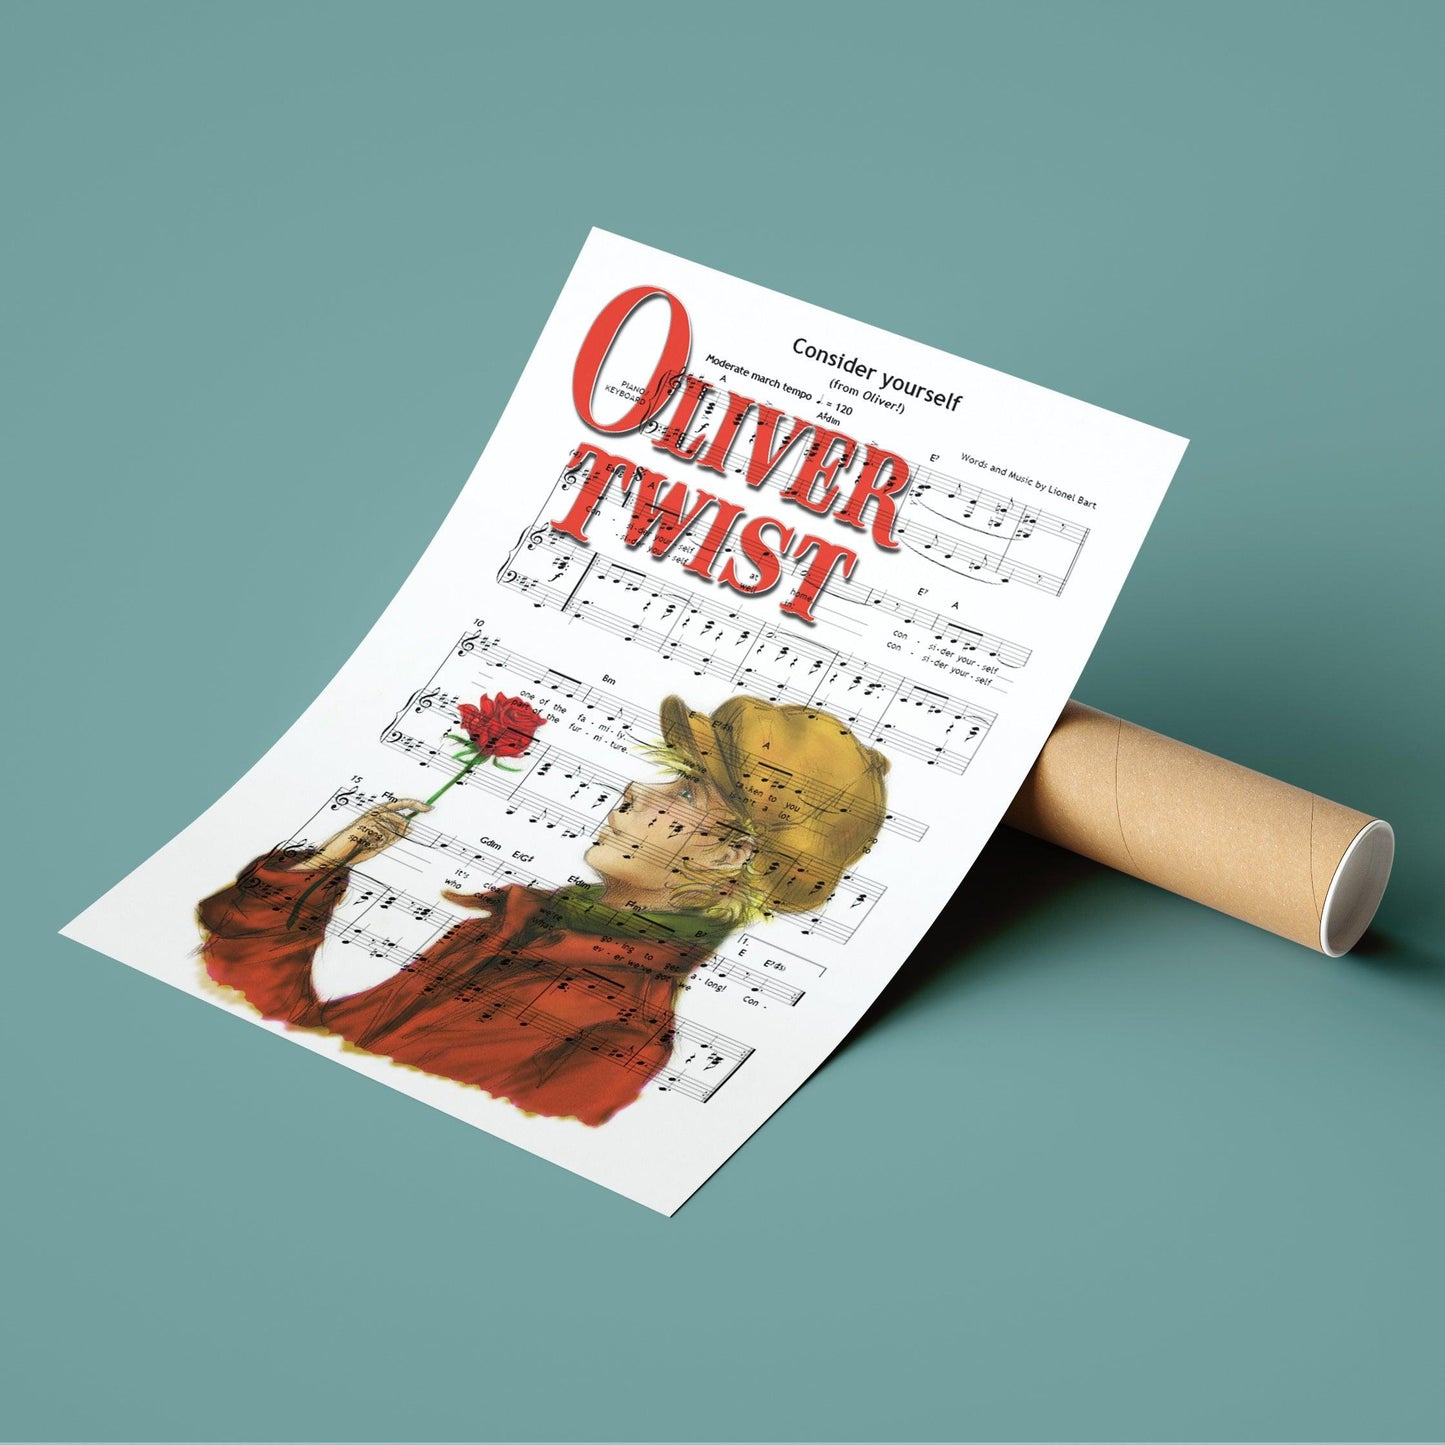 Oliver Twist - Consider Yourself Poster